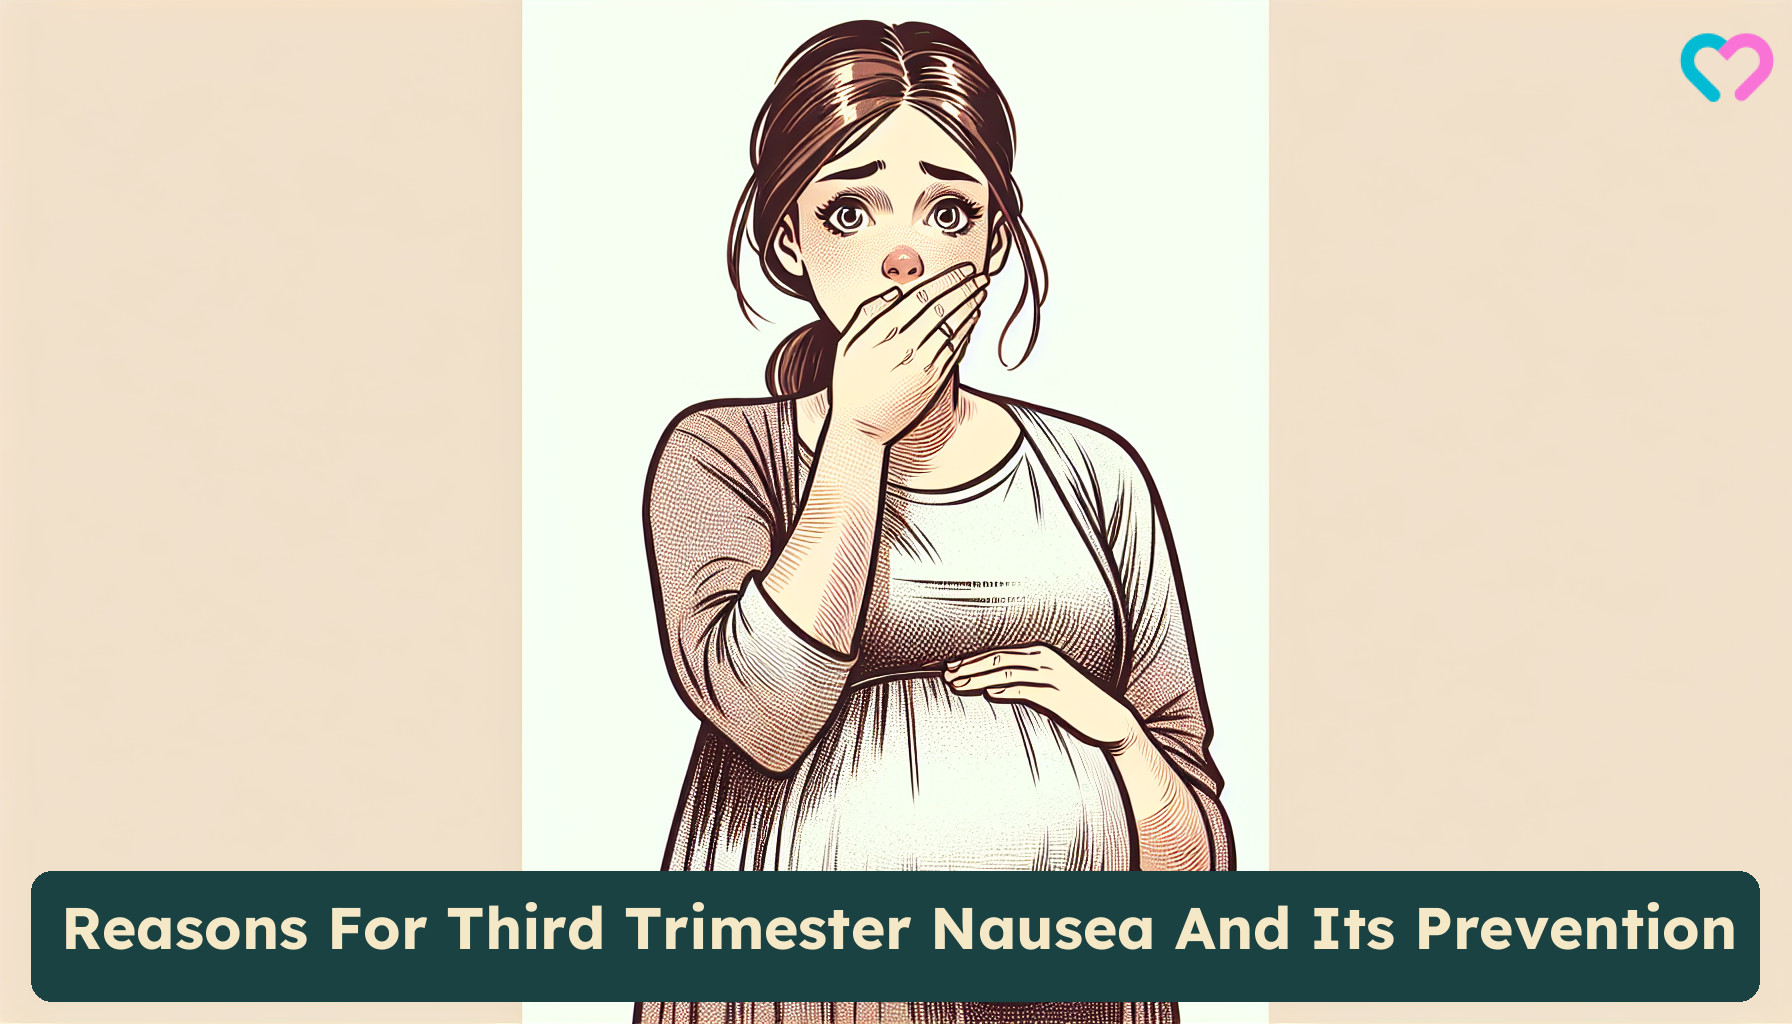 Nausea in 3rd Trimester - Reasons, Remedies and Prevention